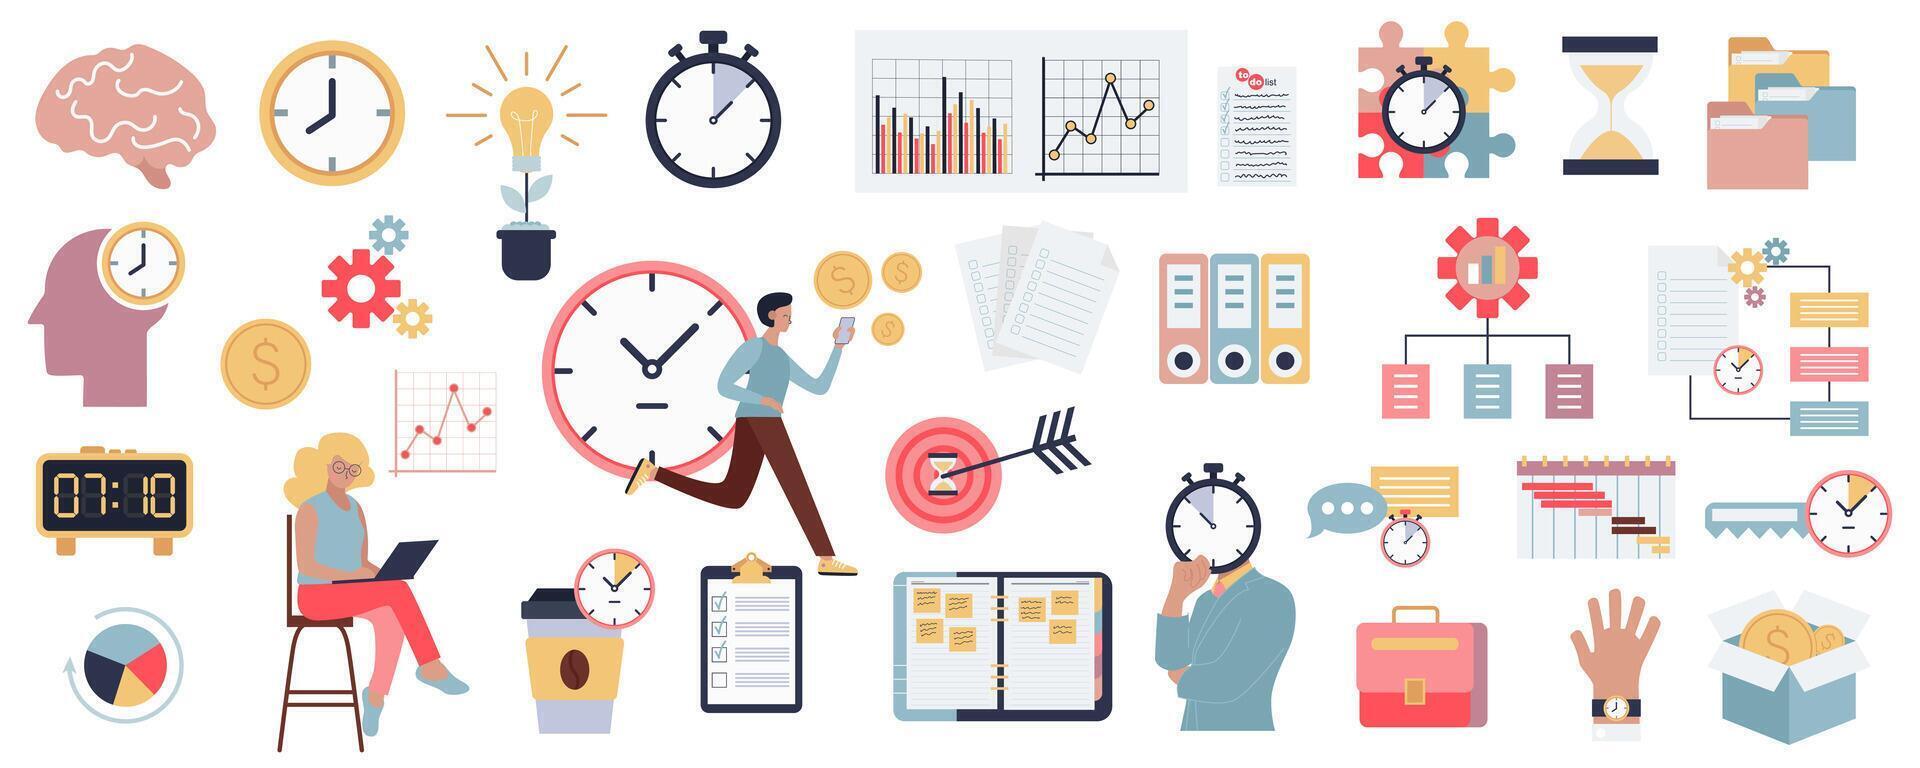 Time management mega set in flat graphic design. Collection elements of office workflow signs, countdown clock, schedules, hourglass, business deadline, hurry employees, other. Vector illustration.